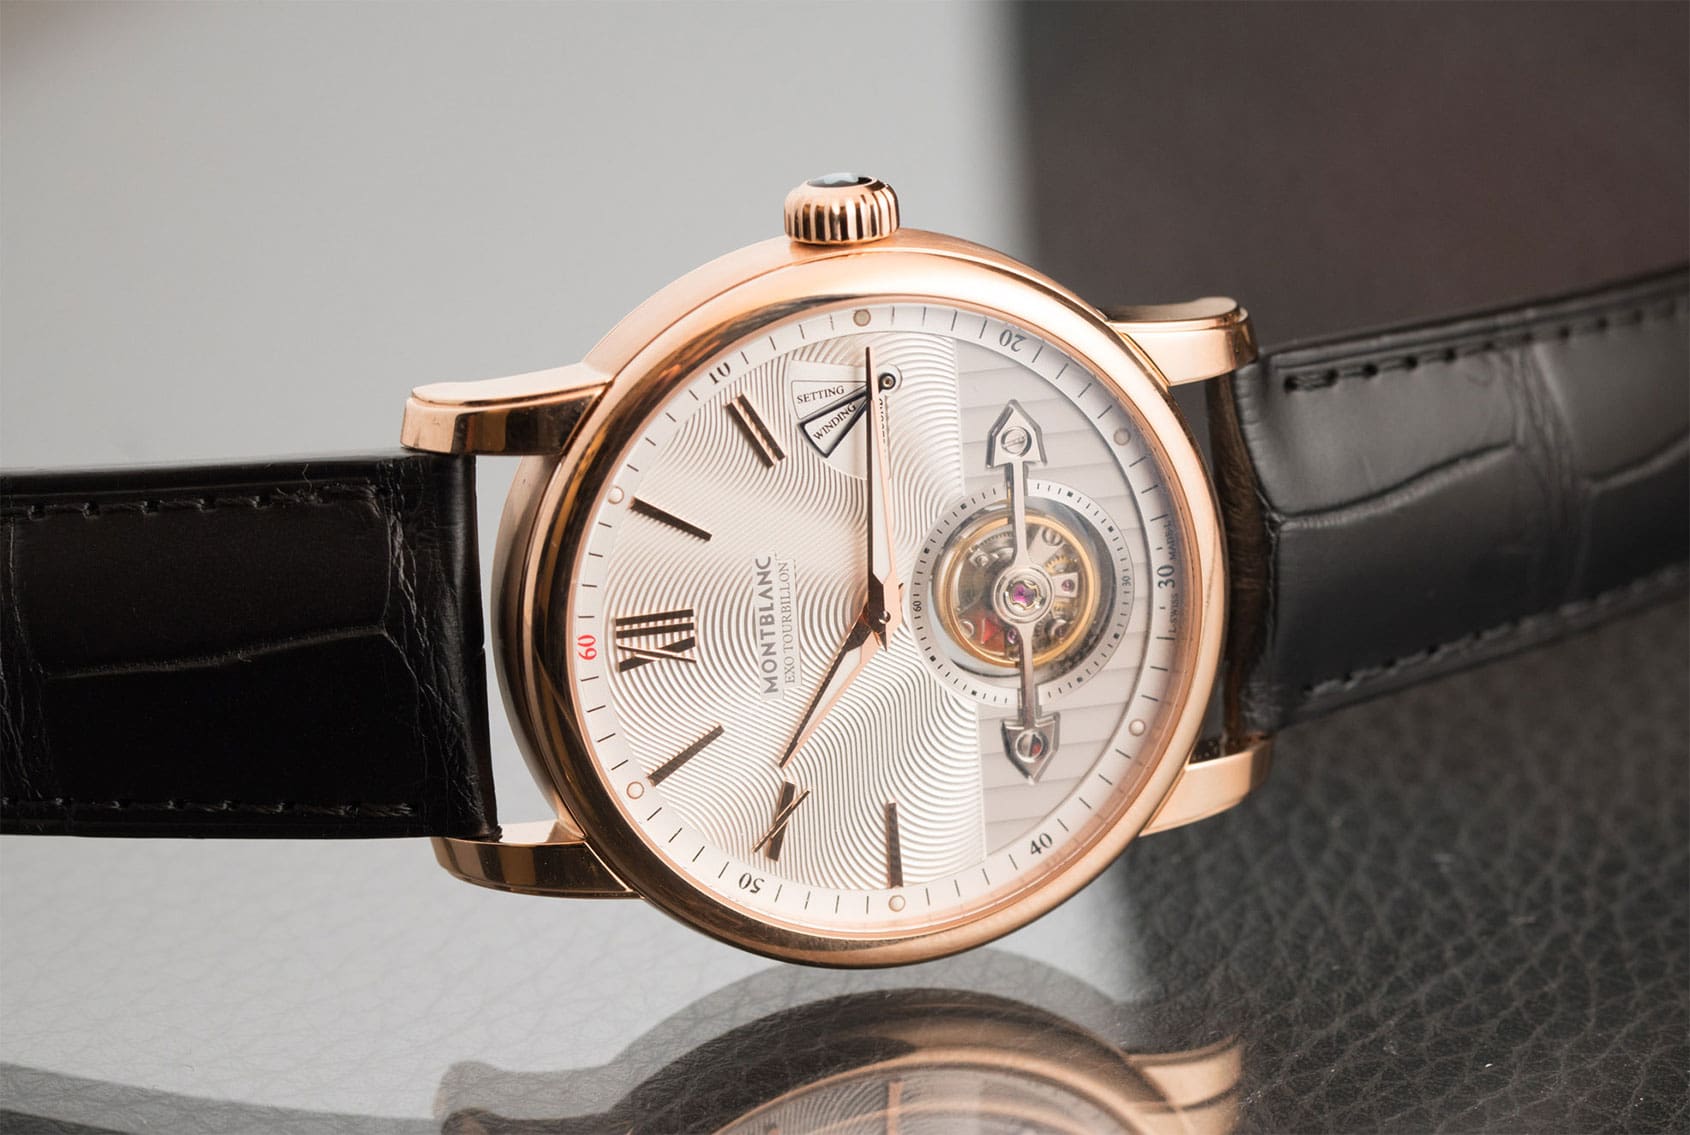 HANDS-ON: The Montblanc 4810 ExoTourbillon Slim – a smart tourbillon at a great price